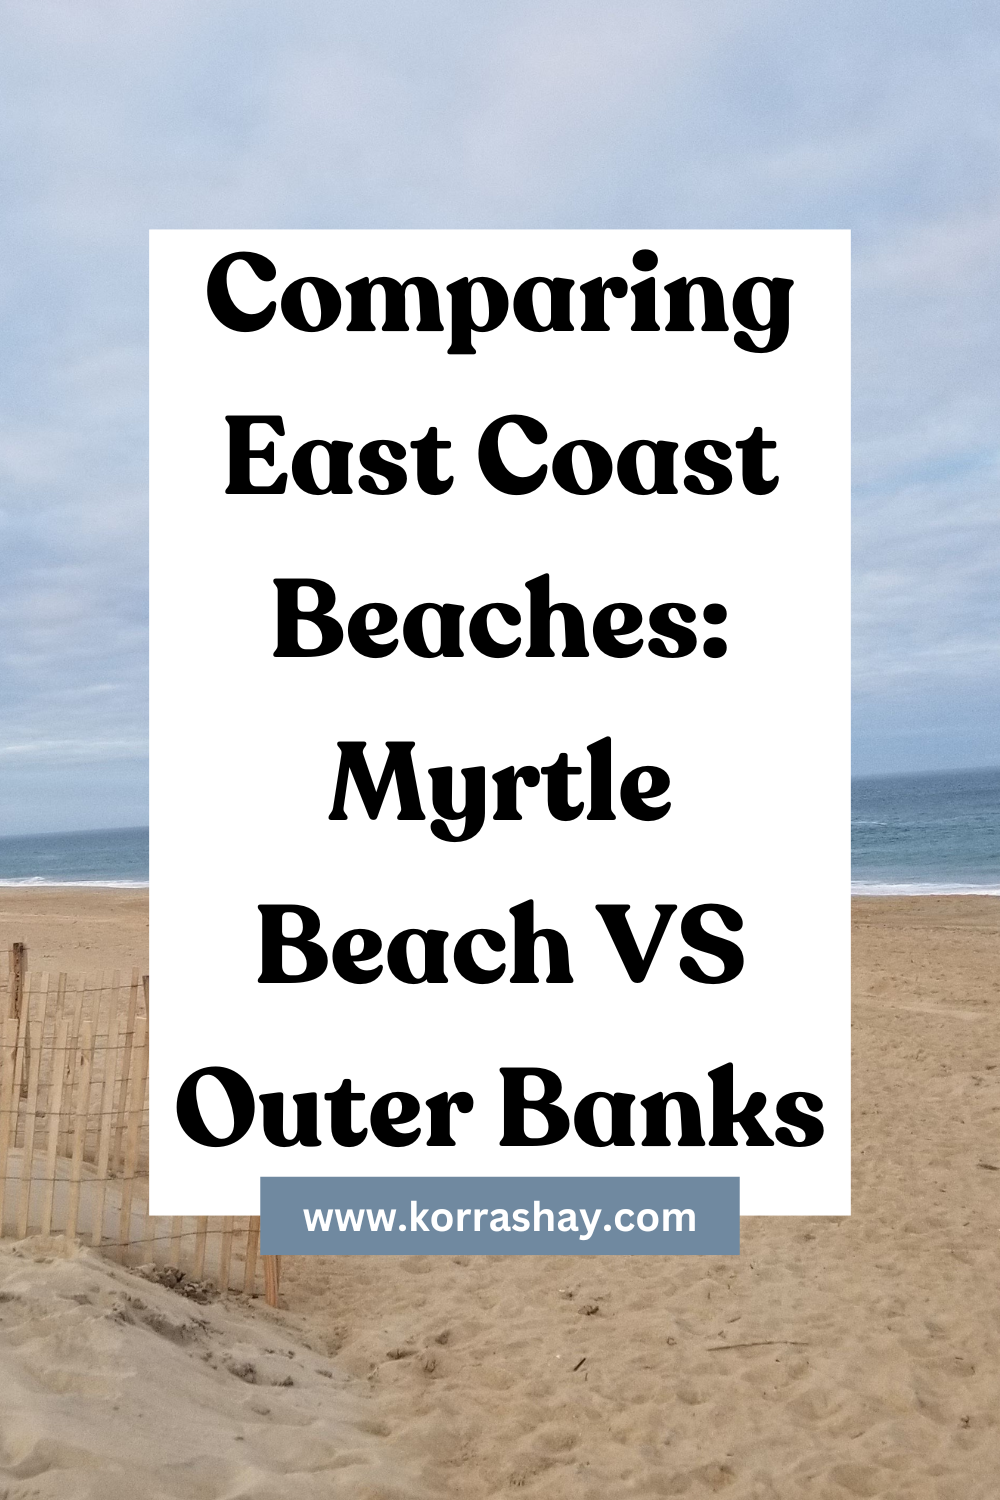 Comparing East Coast Beaches: Myrtle Beach VS Outer Banks